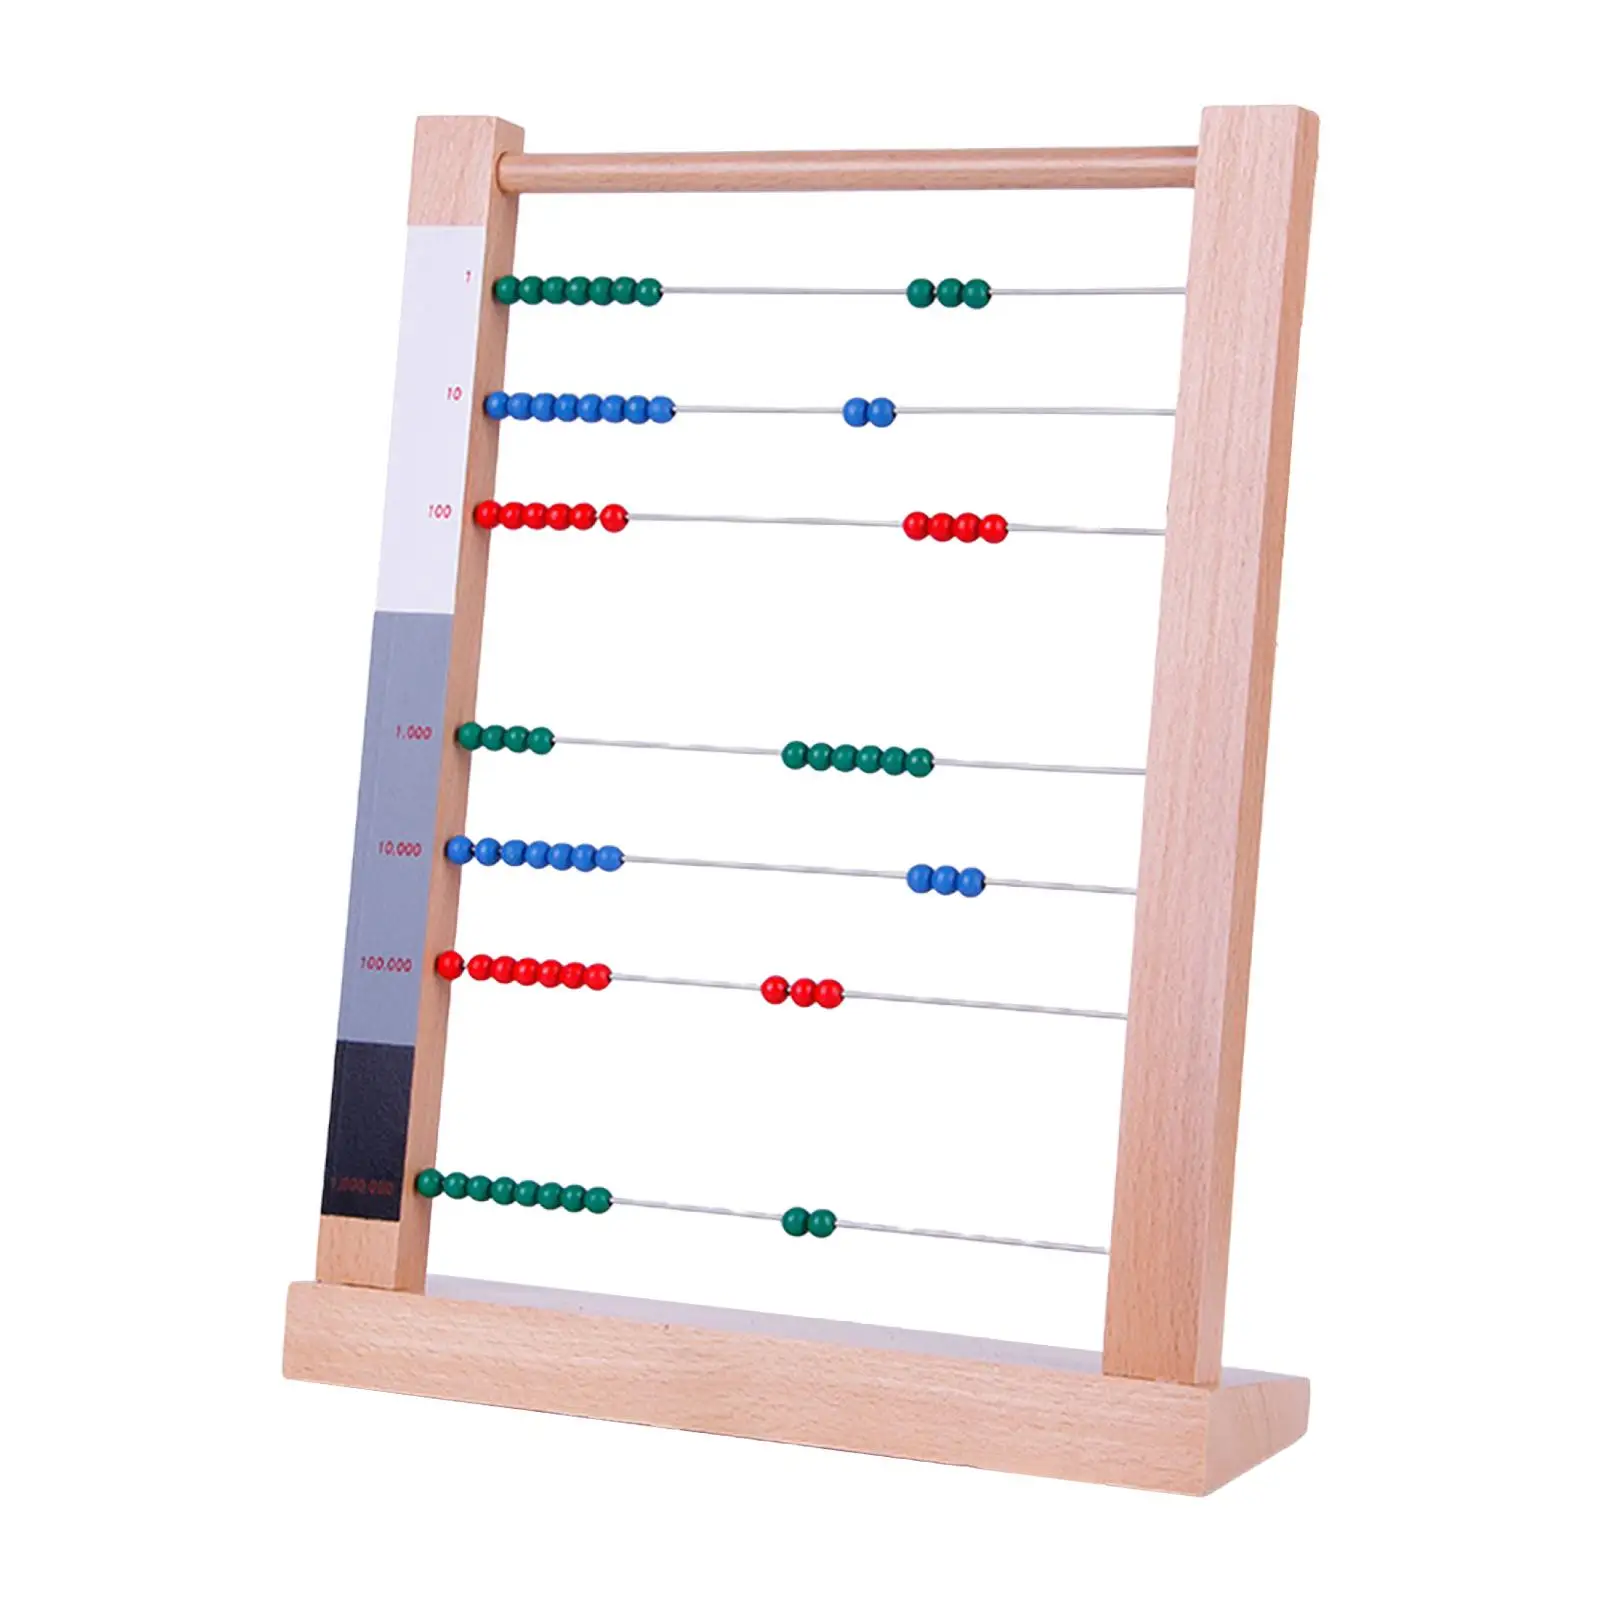 Wooden Small Bead Frame Early Educational with Color Ful Beads Mathematics Abacus for Children Kindergarten Toddlers Kids Gifts